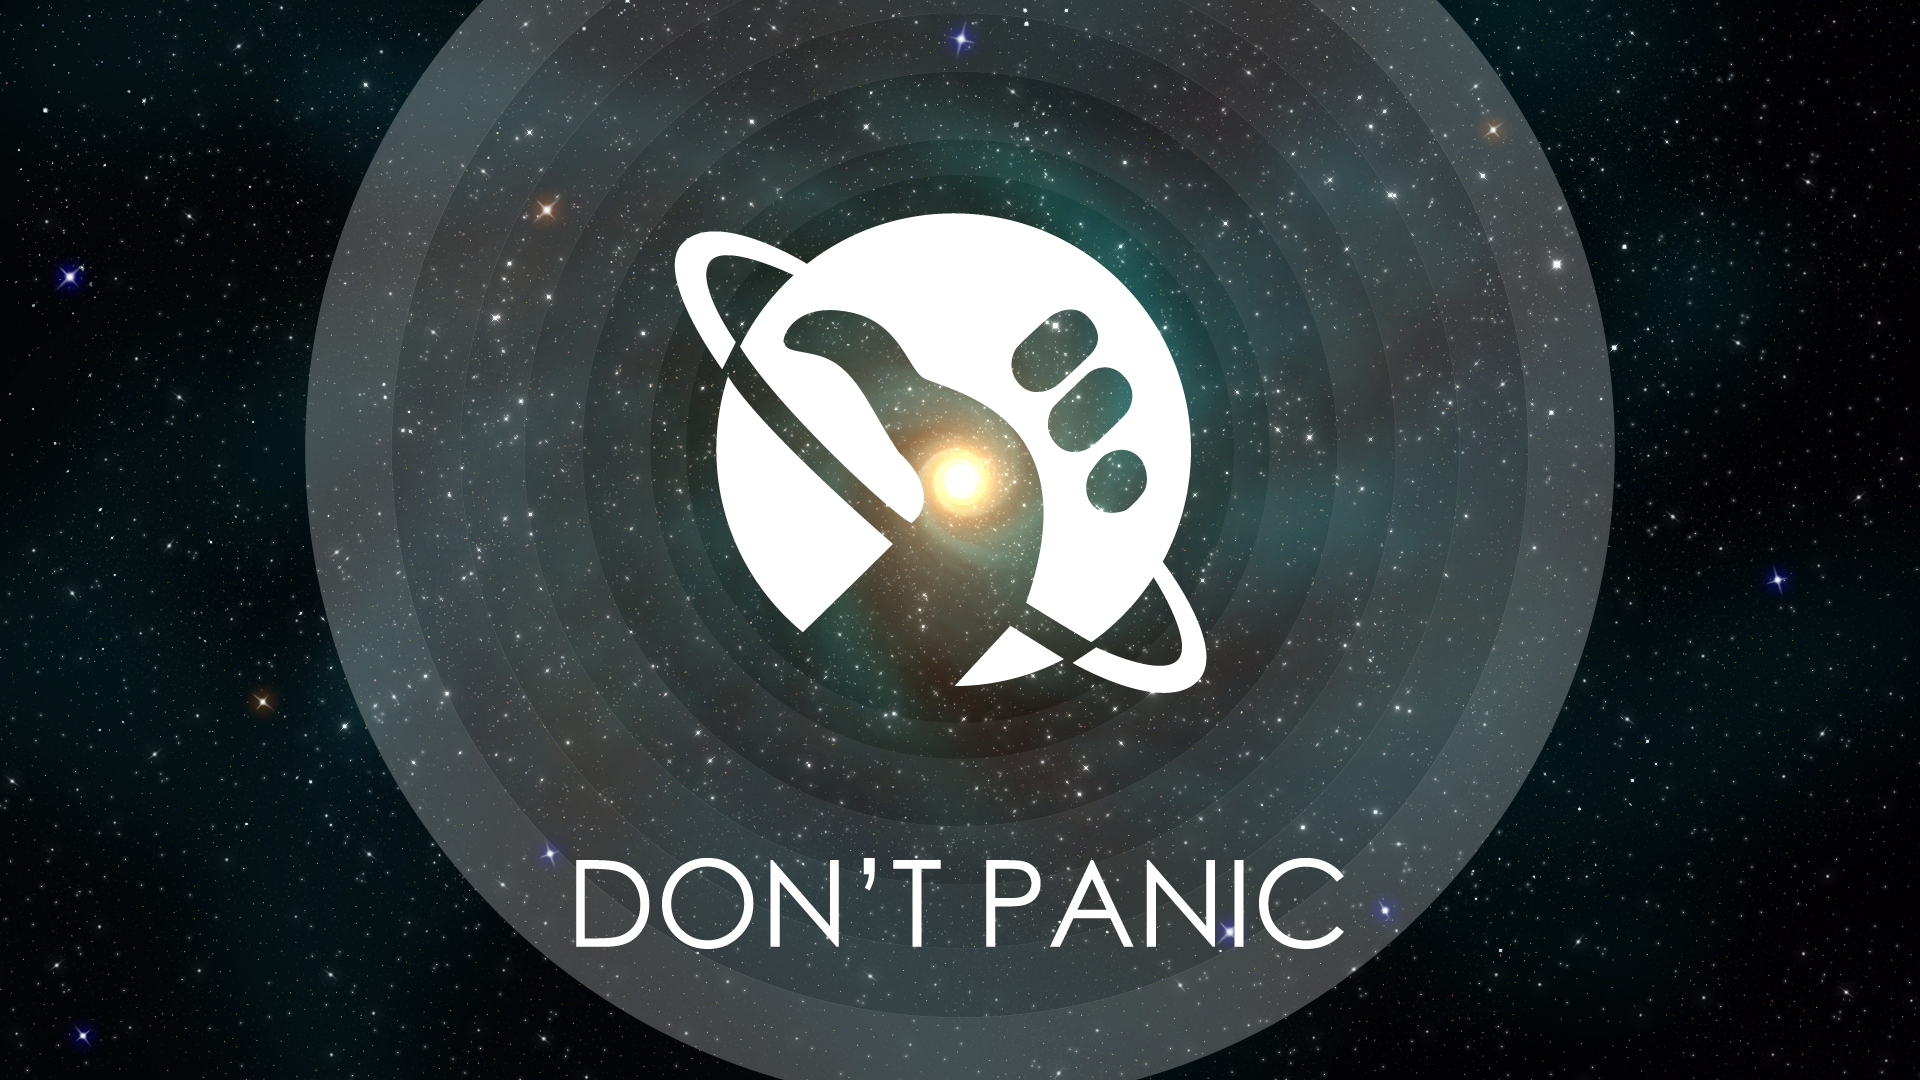 General 1920x1080 The Hitchhiker's Guide to the Galaxy logo science fiction